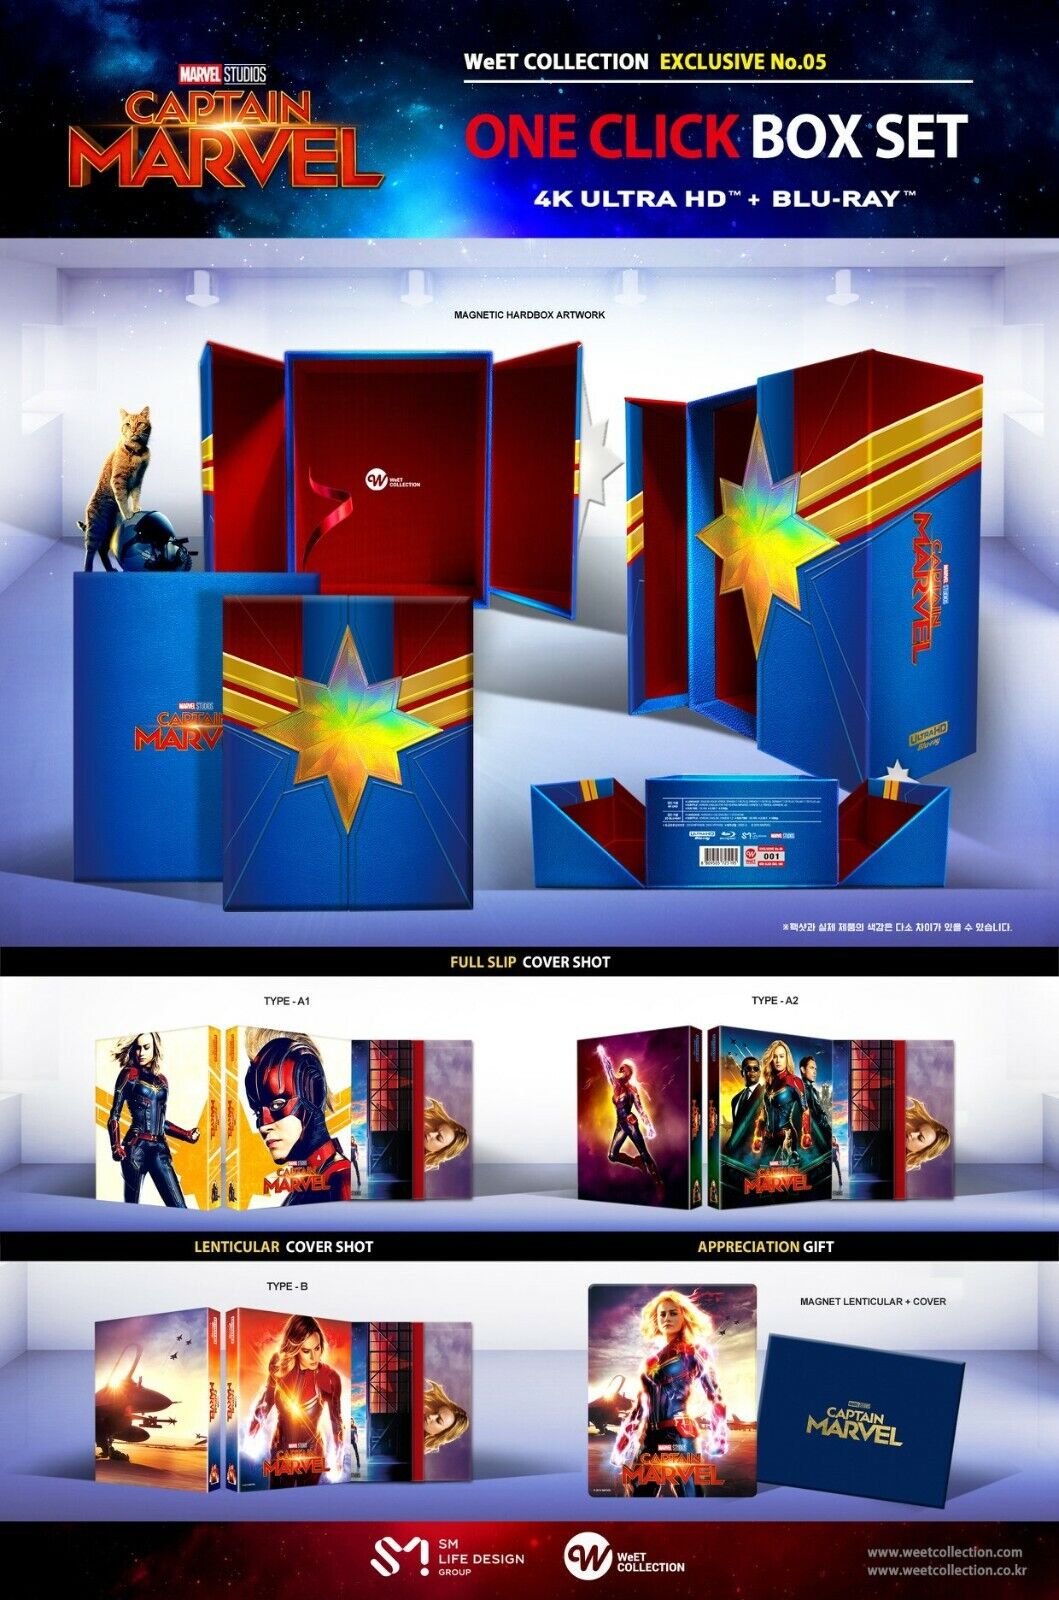 Captain Marvel 4K+2D Blu-ray Steelbook WeET Collection Exclusive #5 One Click Box Set